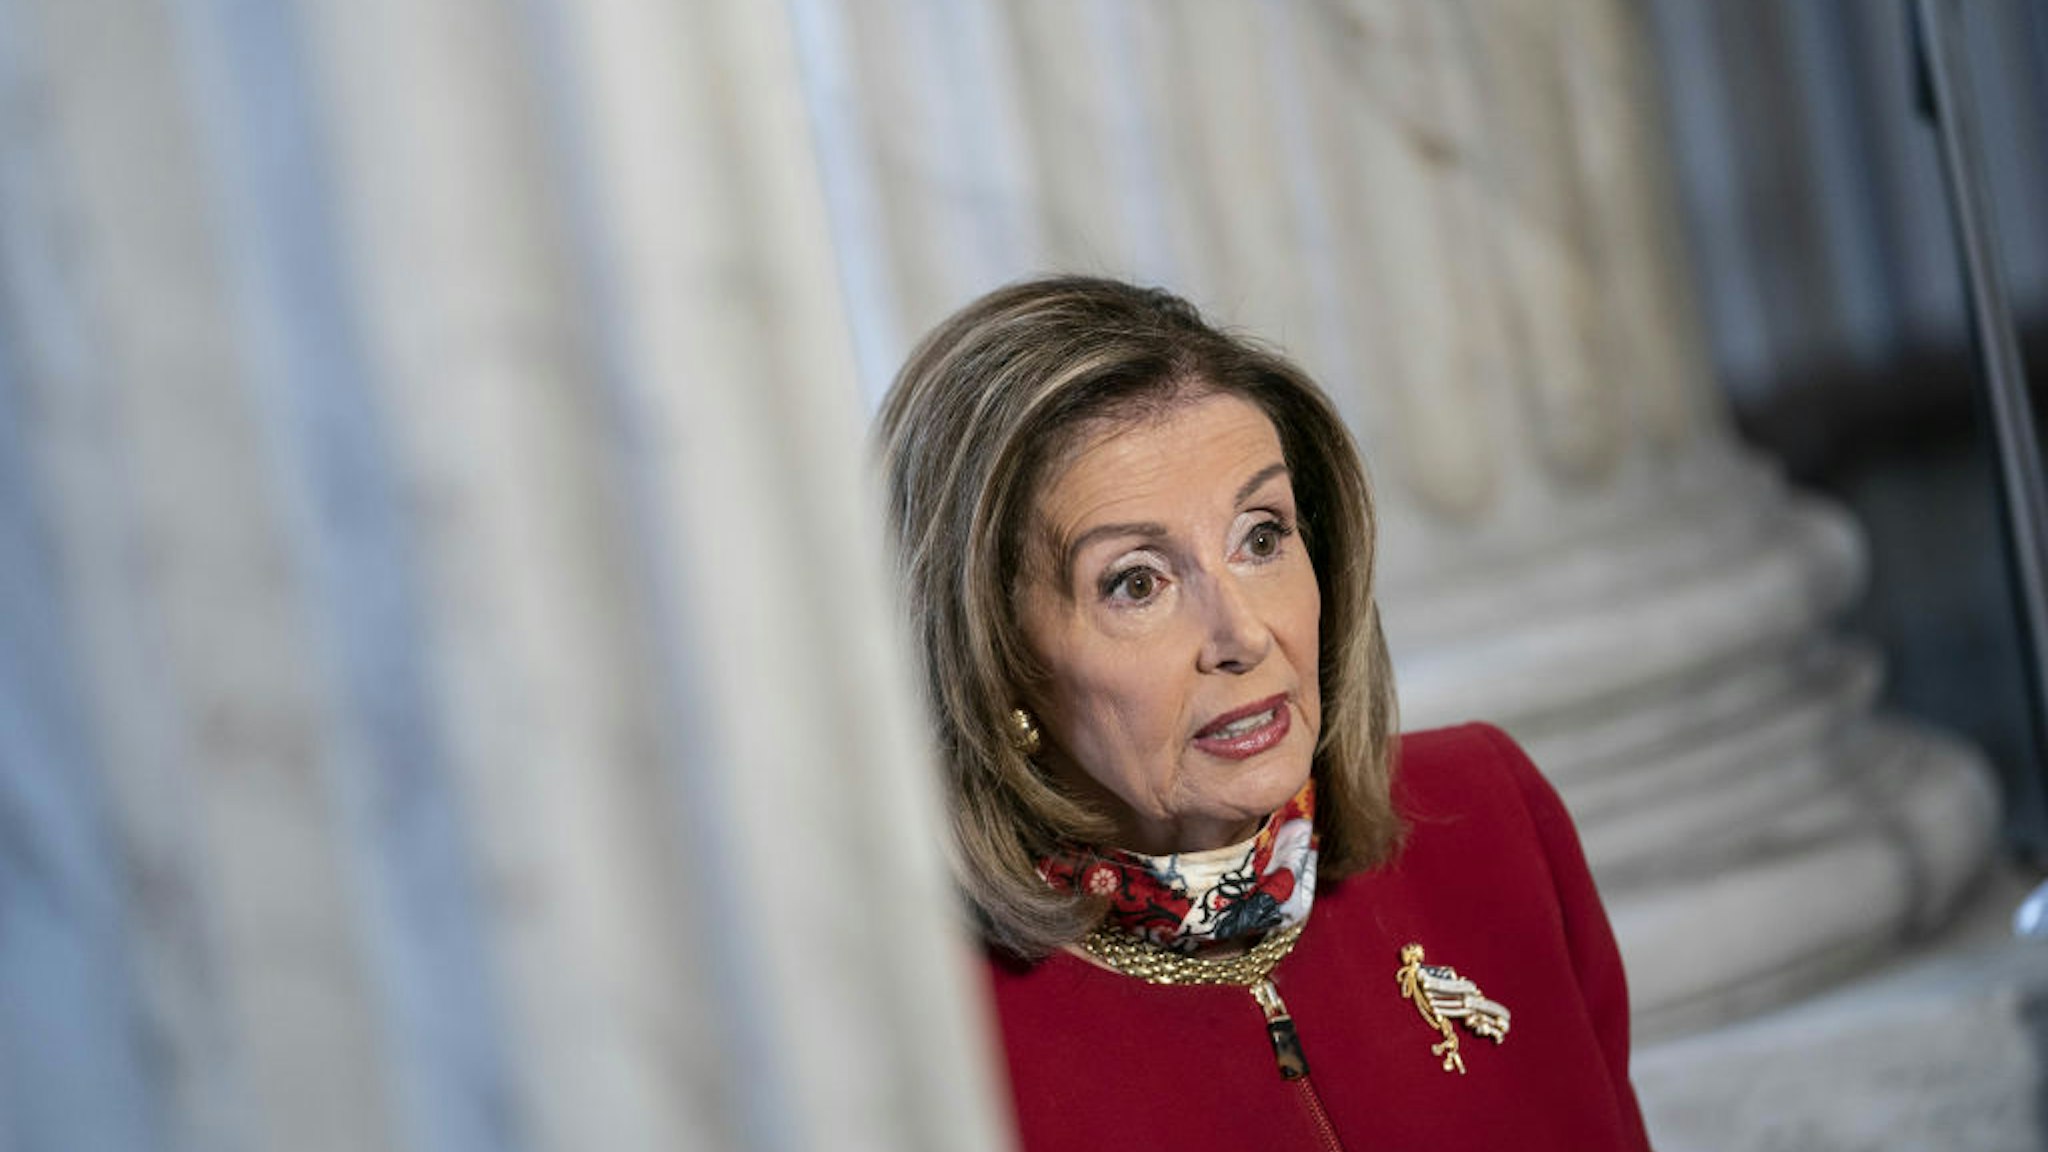 U.S. House Speaker Nancy Pelosi, a Democrat from California, speaks during a television interview at the Russell Senate Office Building on Capitol Hill in Washington, D.C., U.S., on Monday, Sept. 28, 2020.